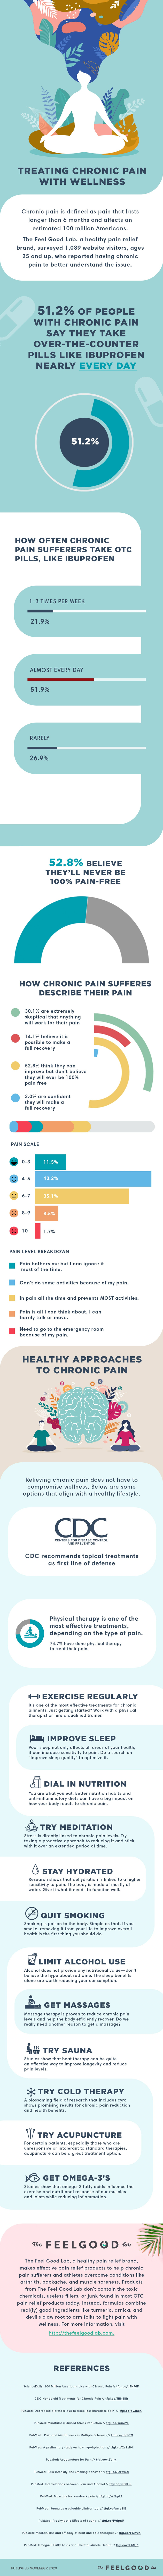 Chronic Pain Infographic by The Feel Good Lab